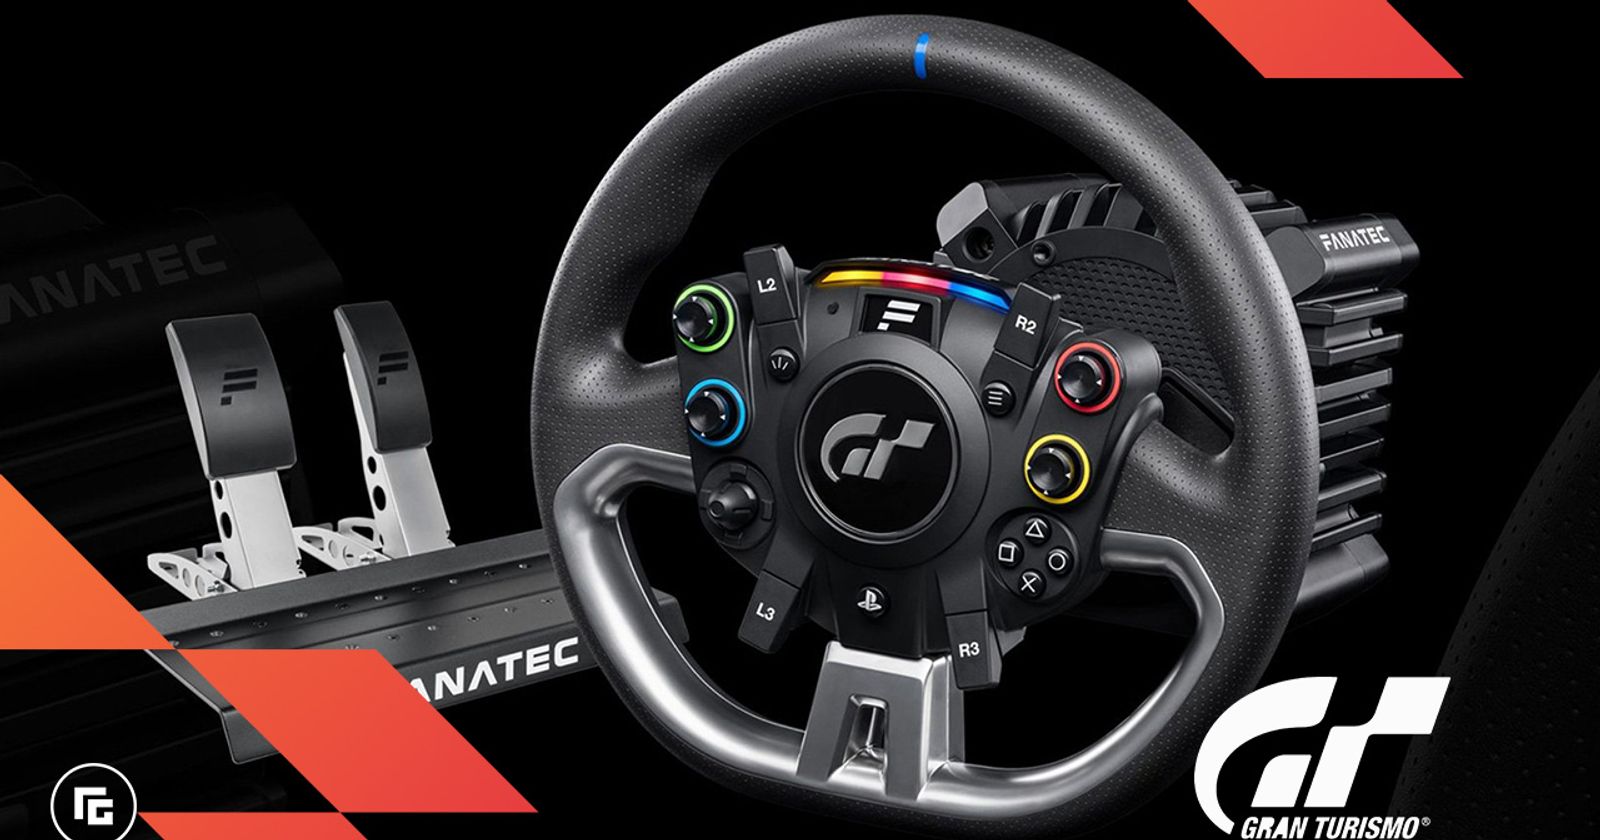 How to use steering wheel on Gran Turismo 7